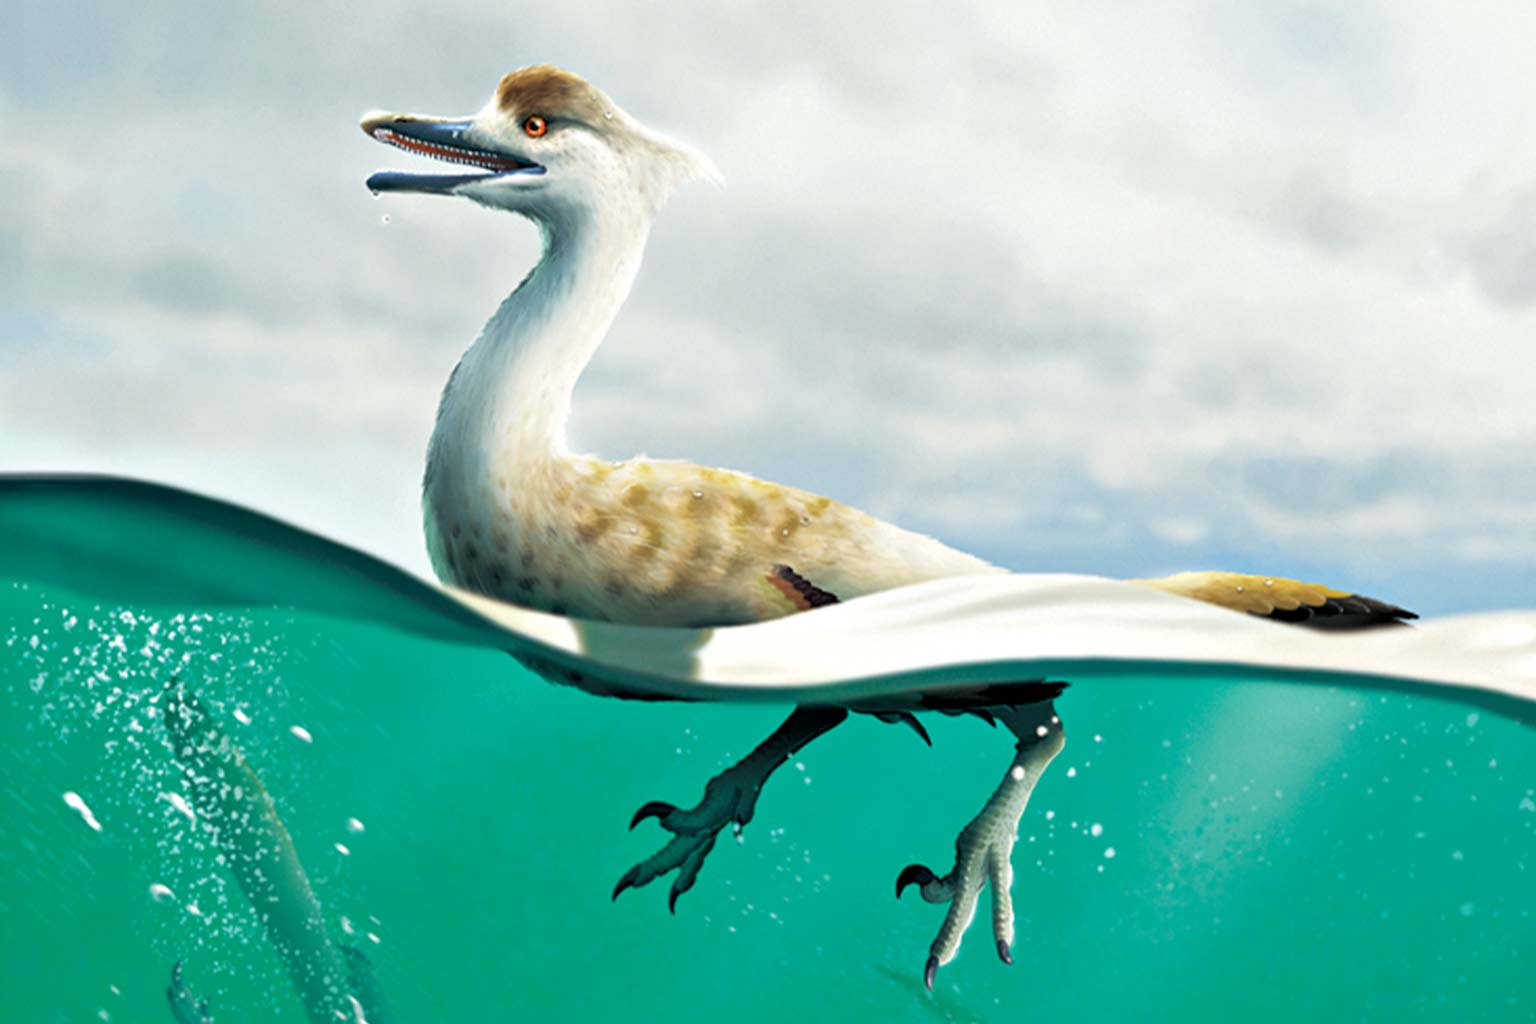 A New Species Of Dinosaur Might Have Dived Like A Duck To